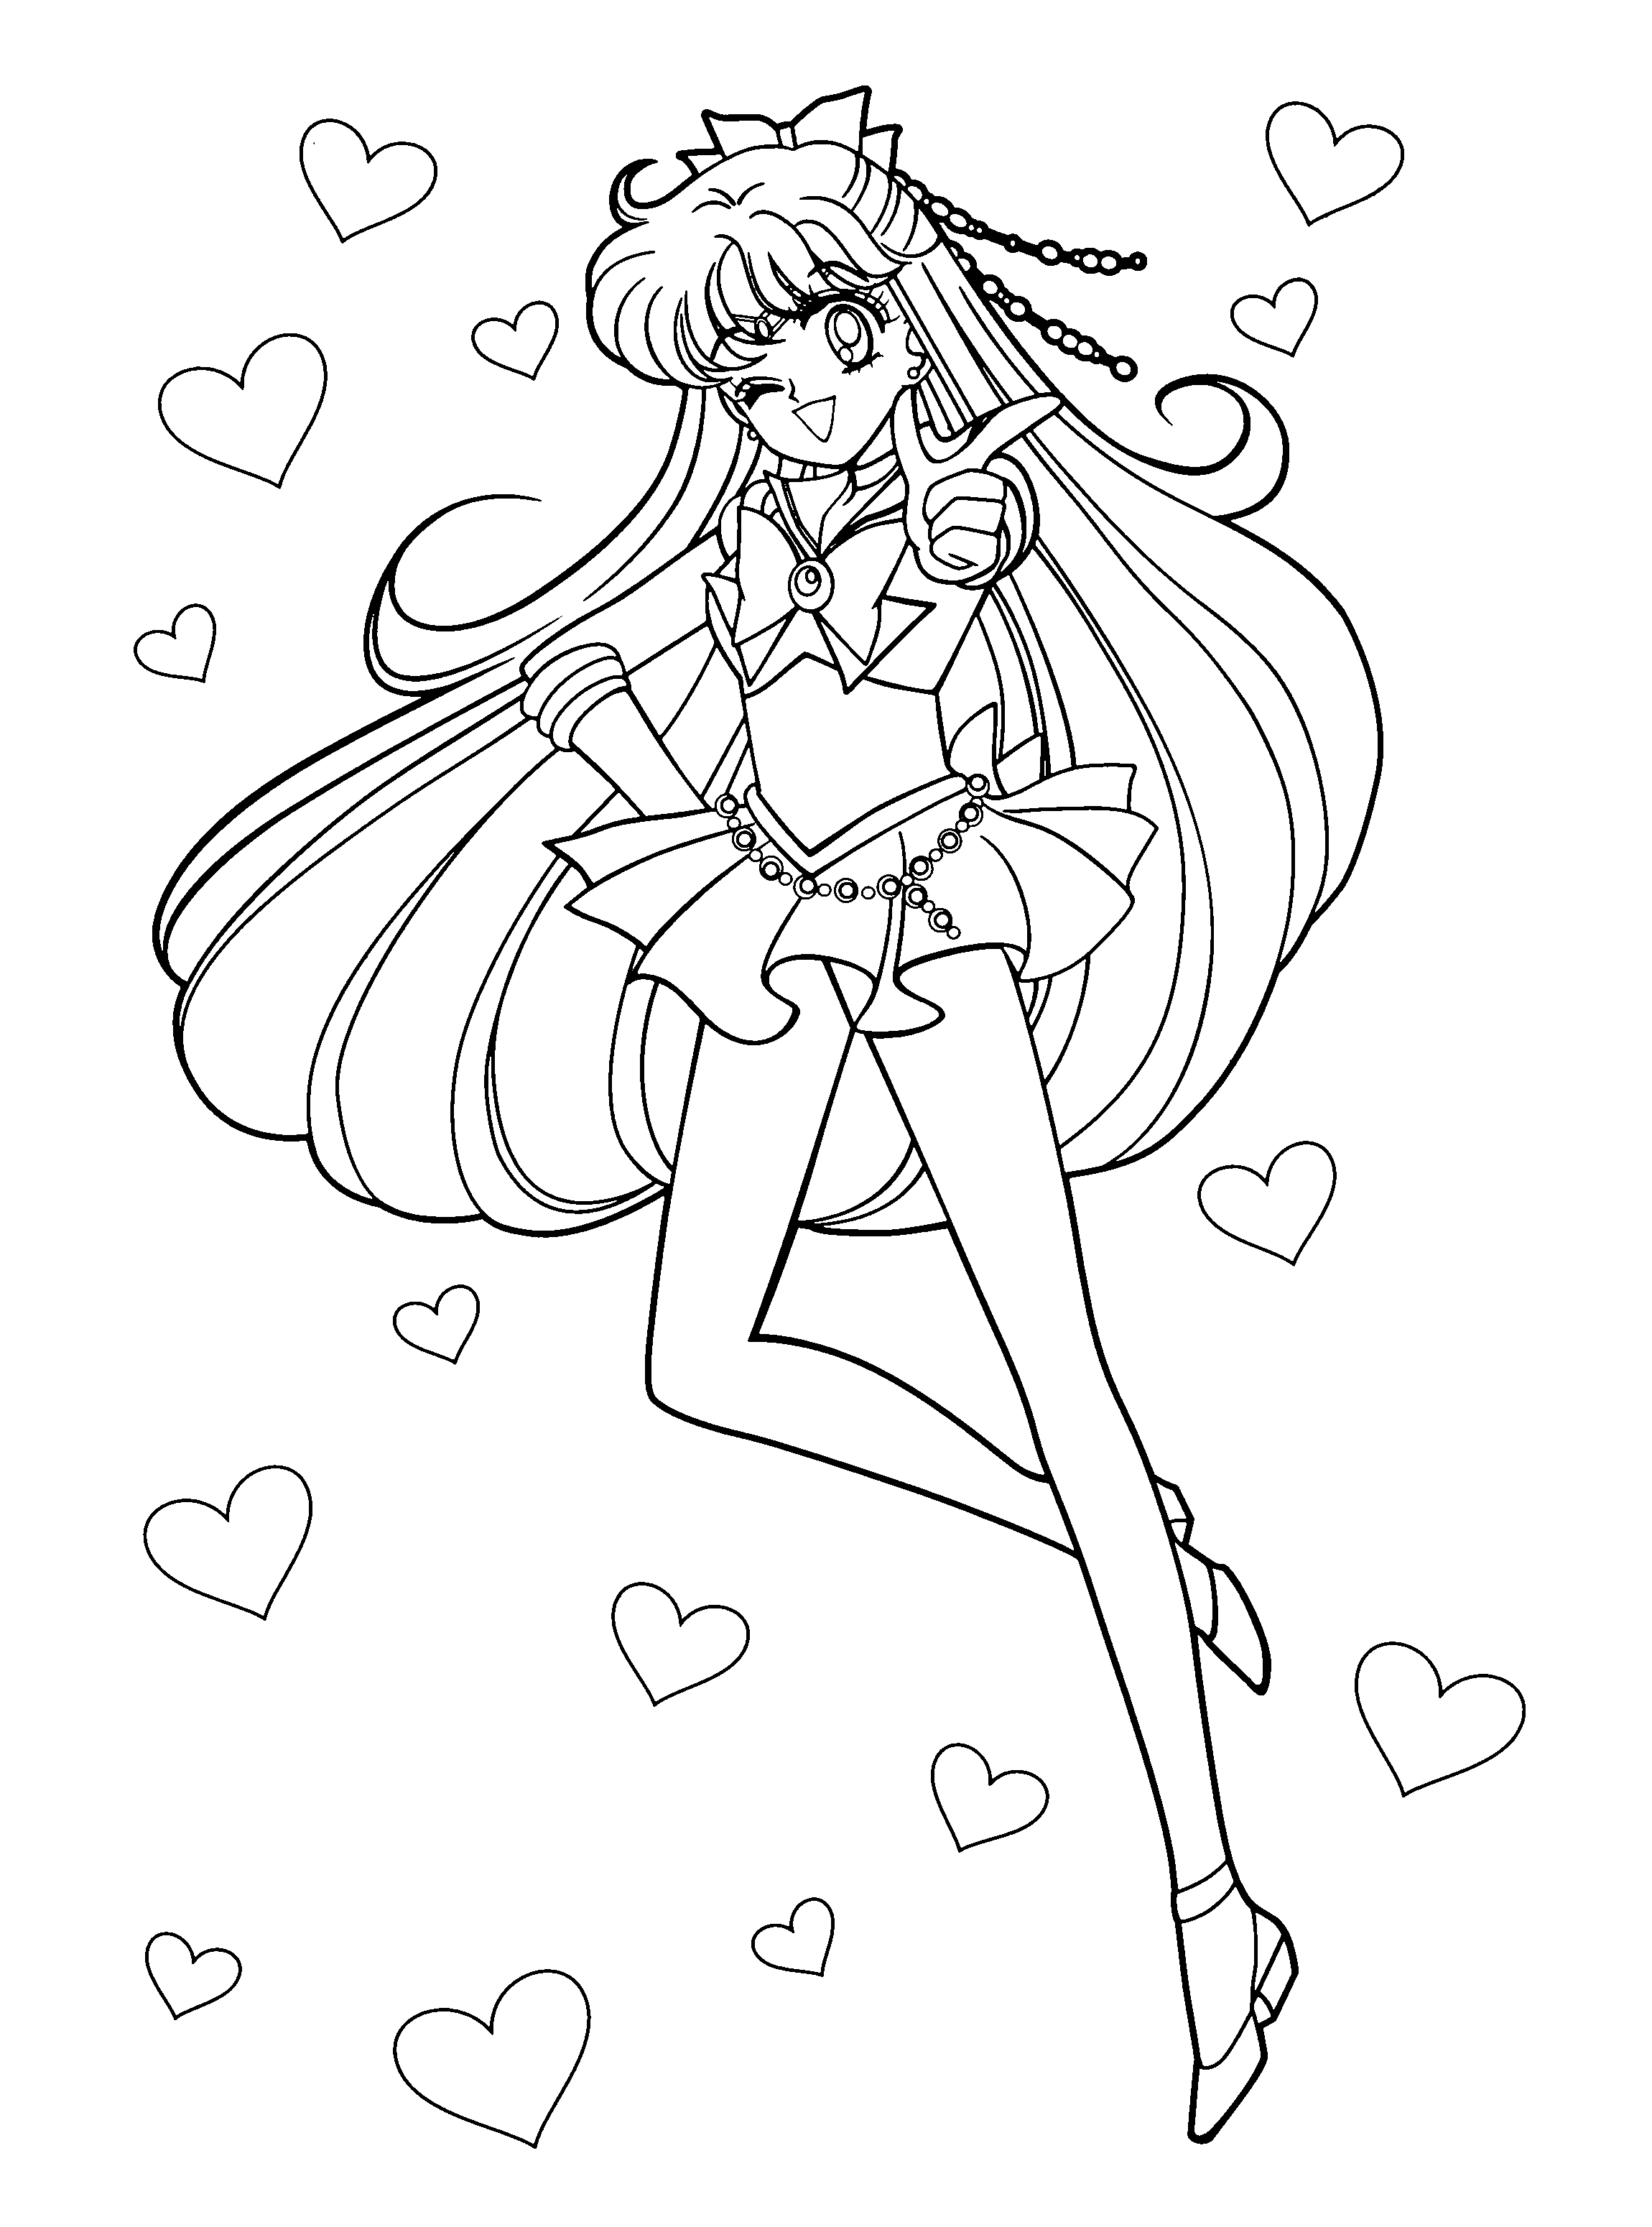 Anime Sailor Moon Coloring Pages - Get Coloring Pages